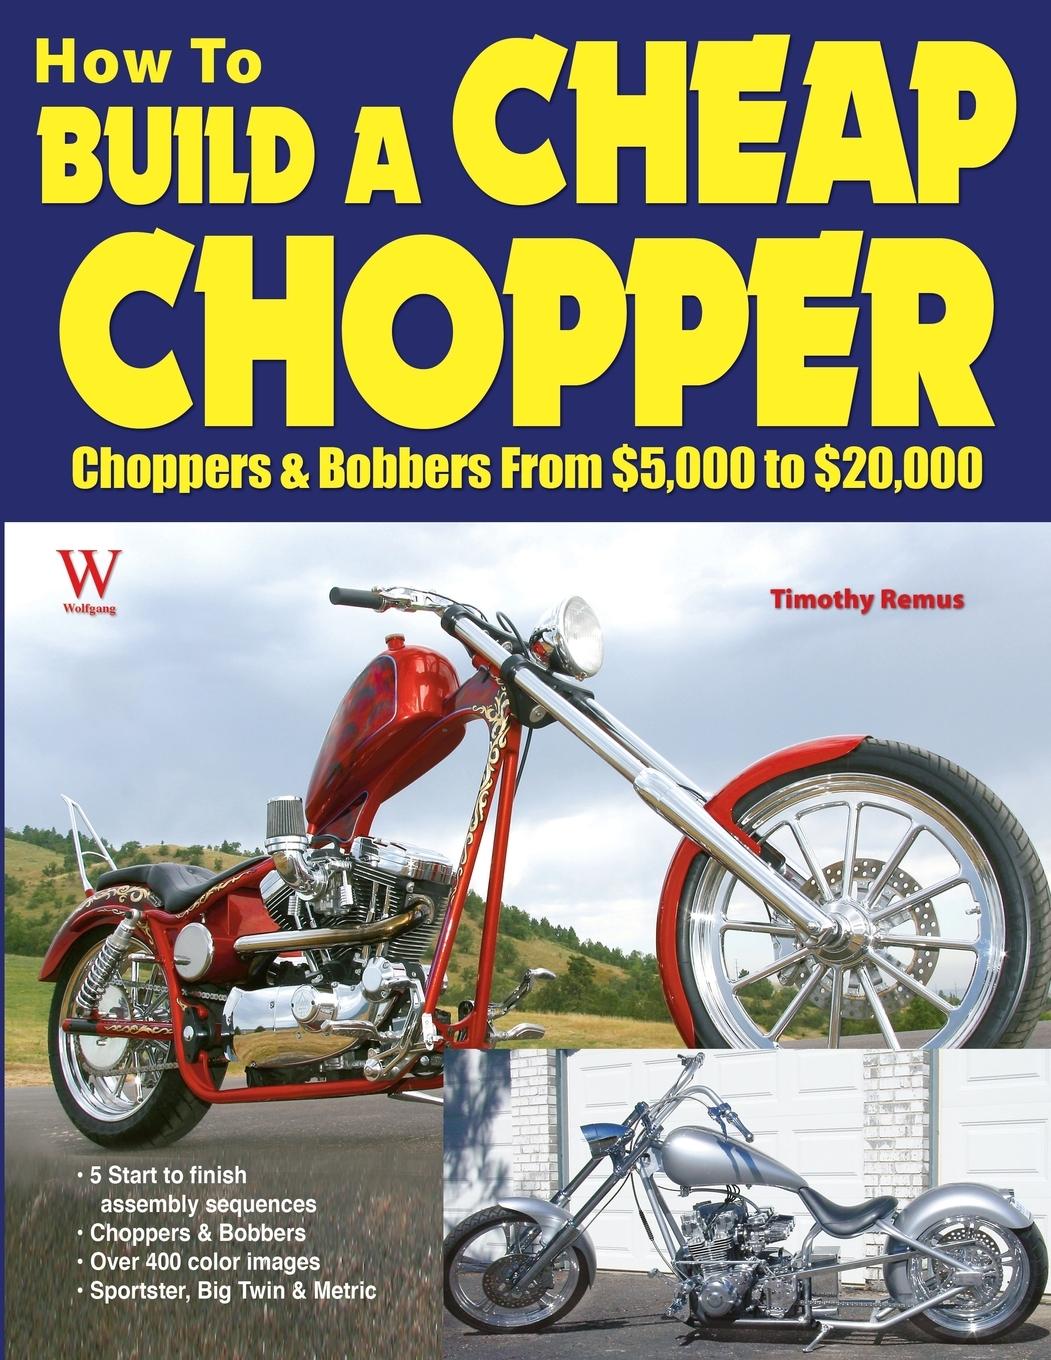 How to Build a Cheap Chopper - Remus, Timothy Wolfgang Publications Inc